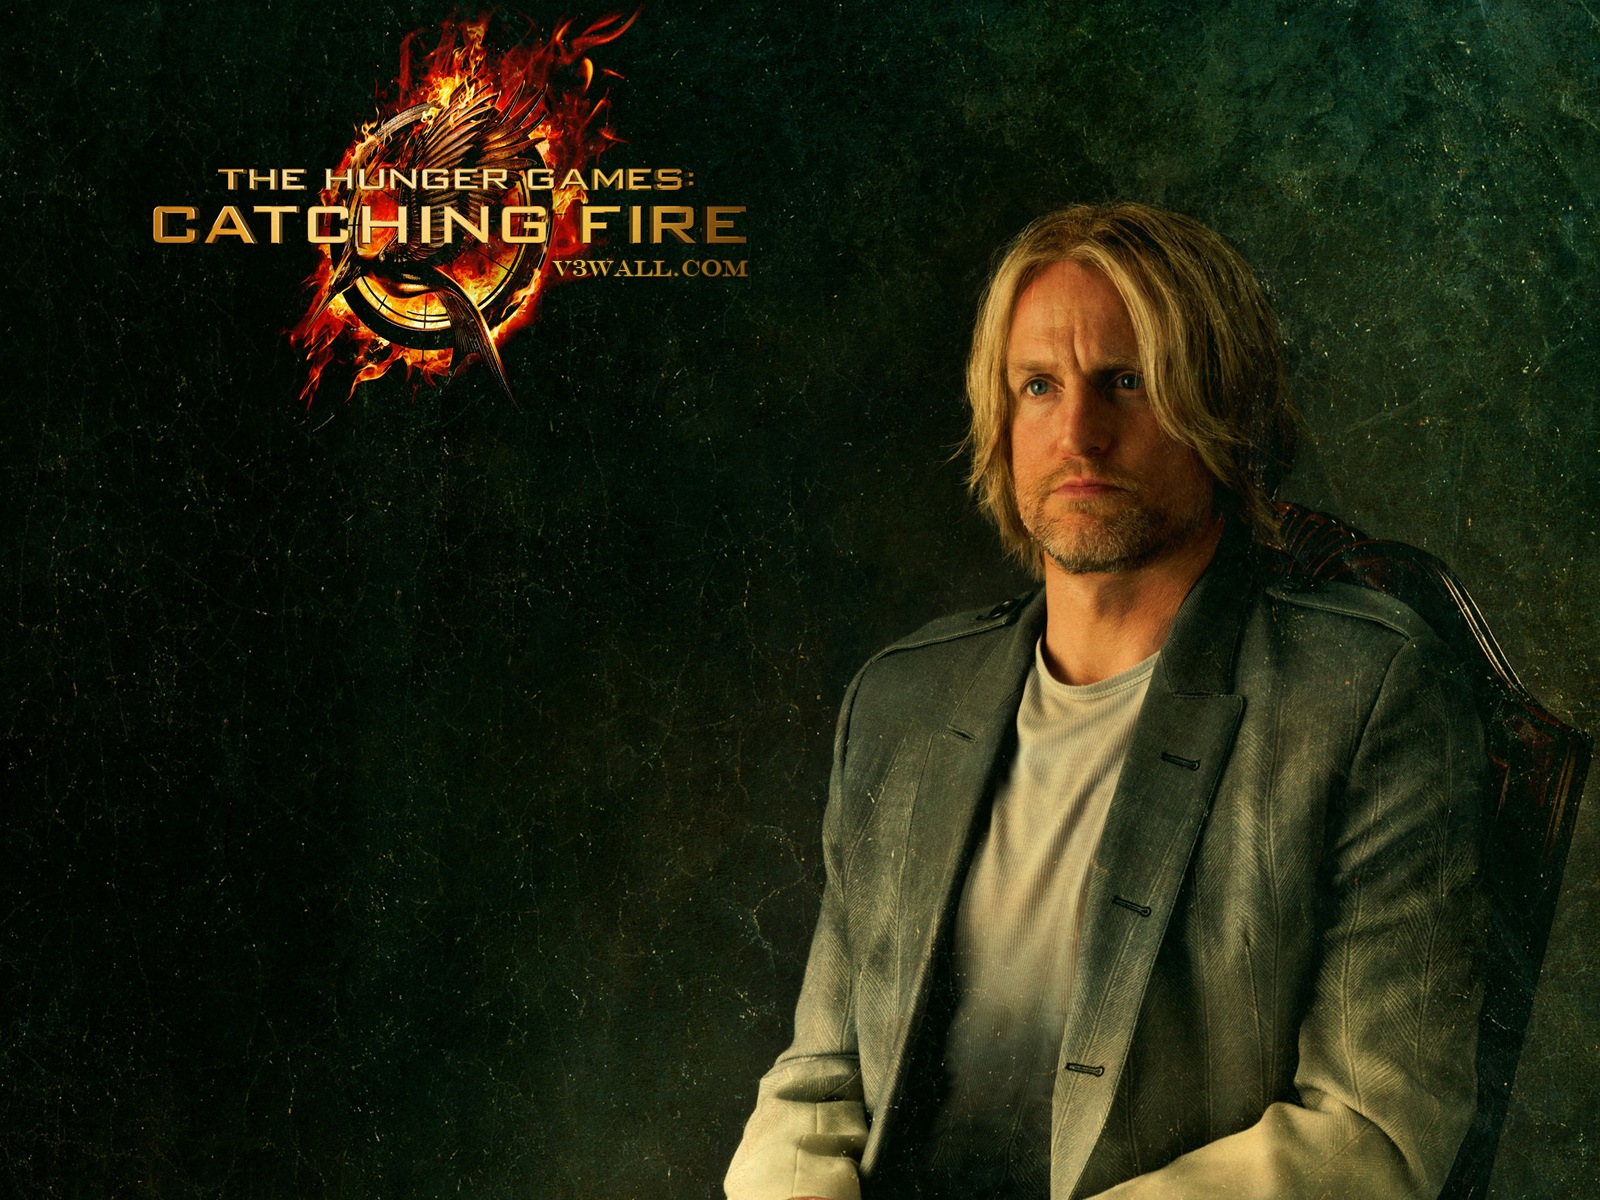 The Hunger Games: Catching Fire wallpapers HD #12 - 1600x1200